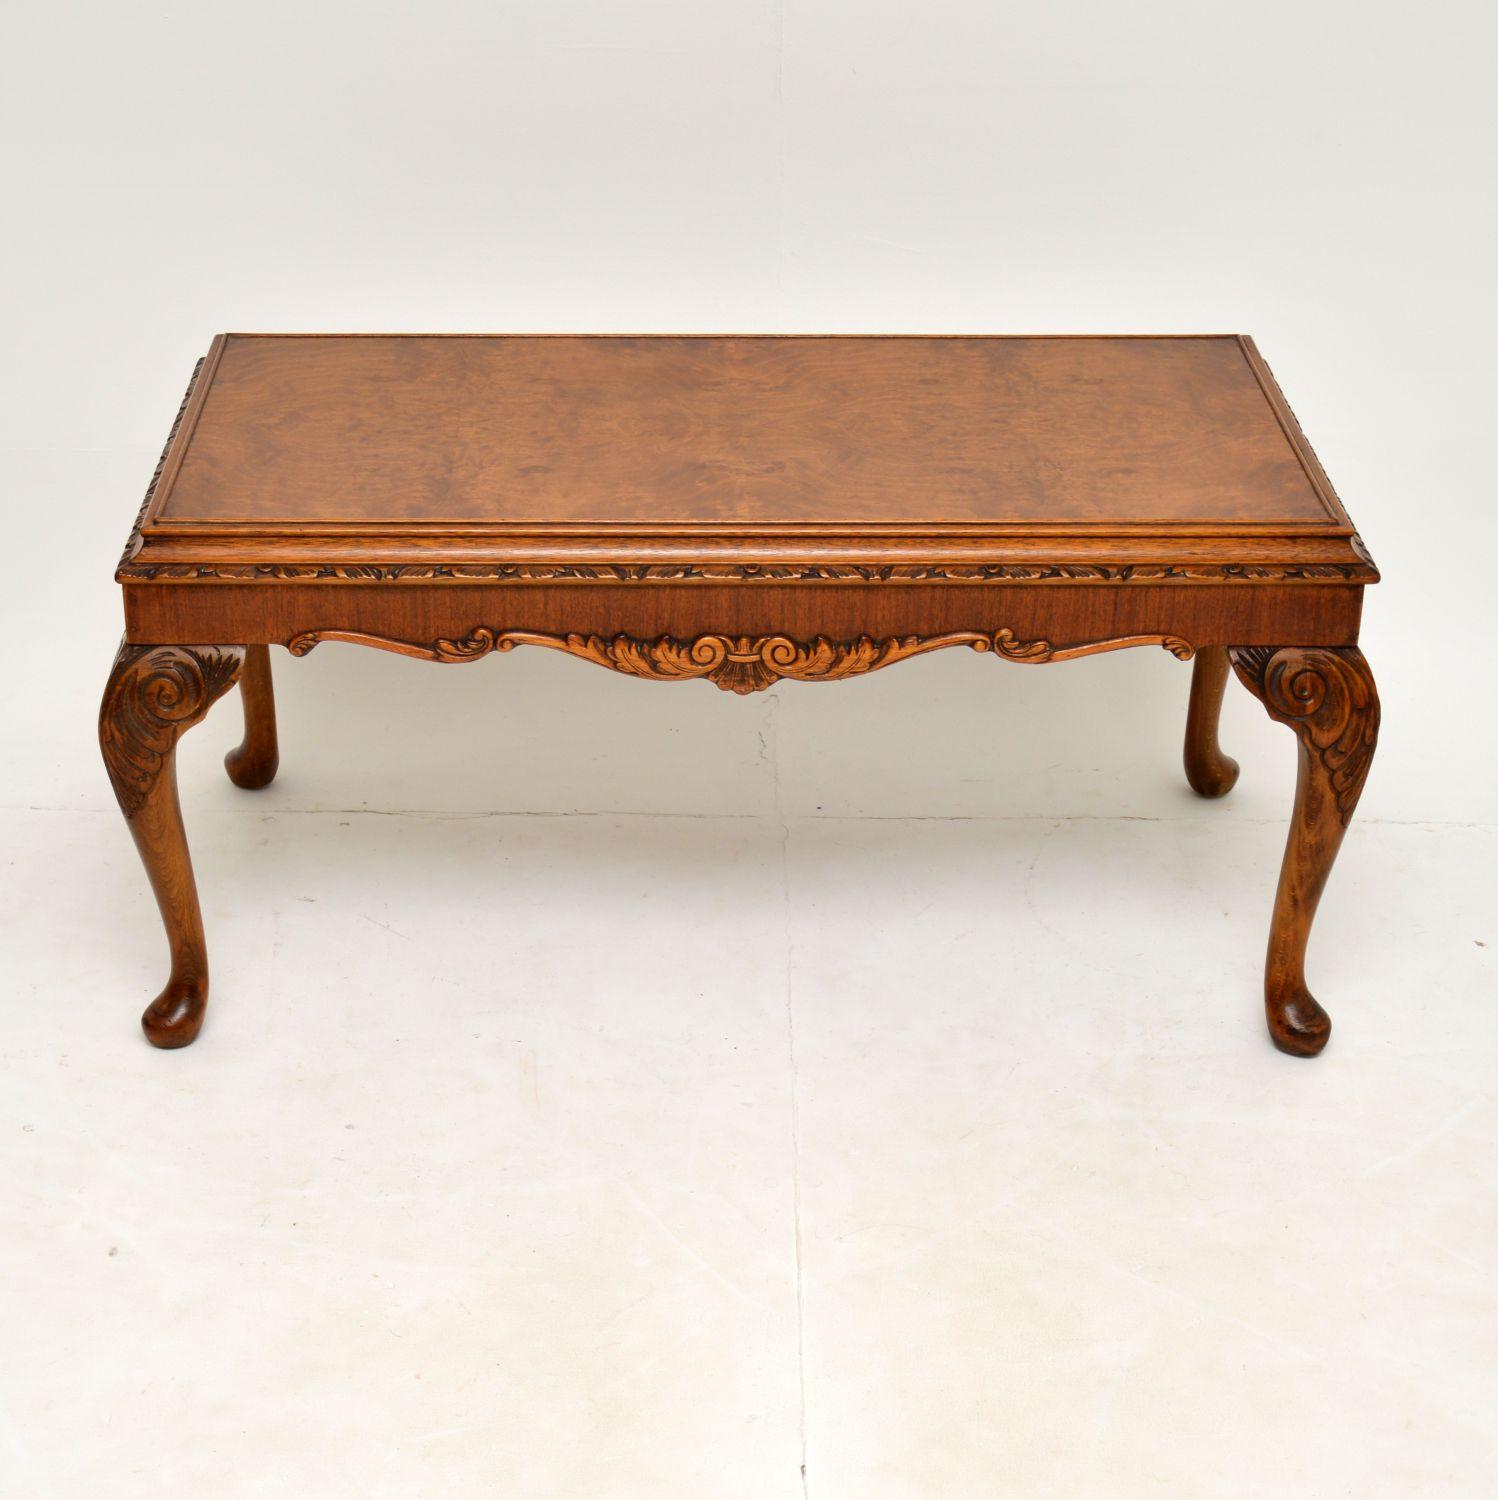 A wonderful antique walnut coffee table in the Queen Anne style & dating from around the 1930’s period.

This table is of lovely quality, with fine carvings around the top & bottom edges and on the tops of the shaped legs. It has a cushioned top